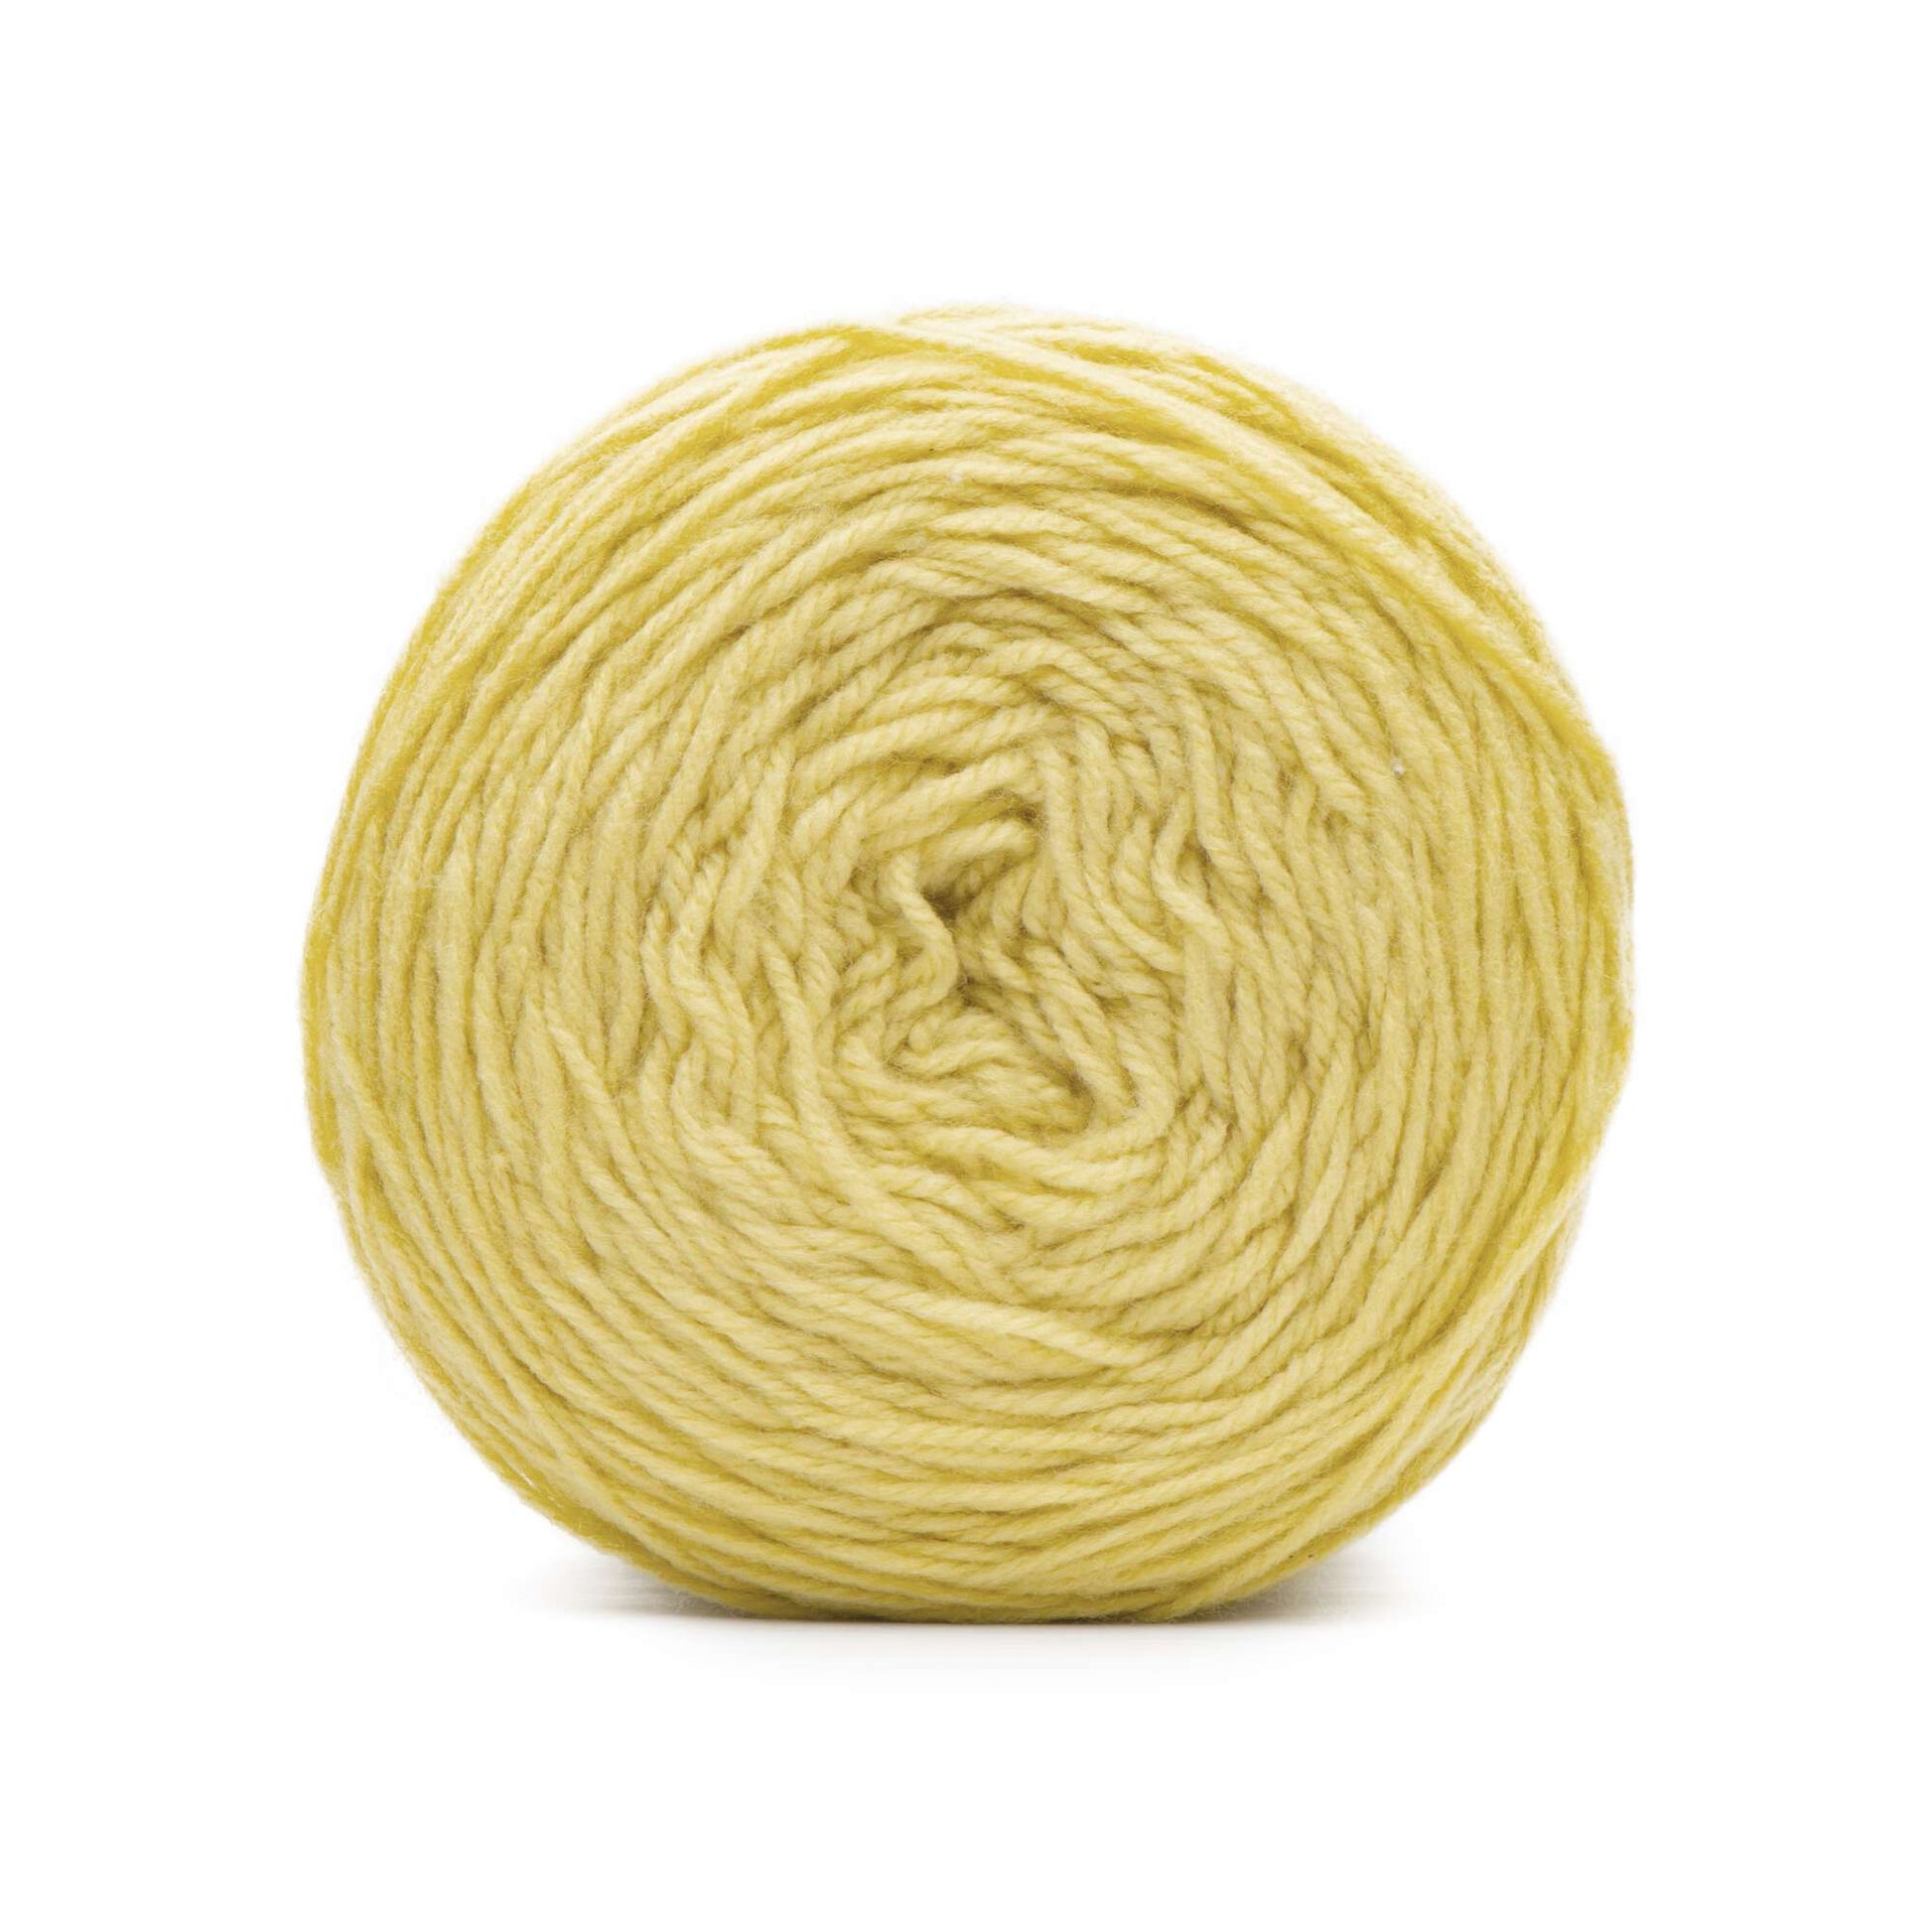 Caron Cakes Yarn in Buttercup Color, Shades of Beige and Browns. 